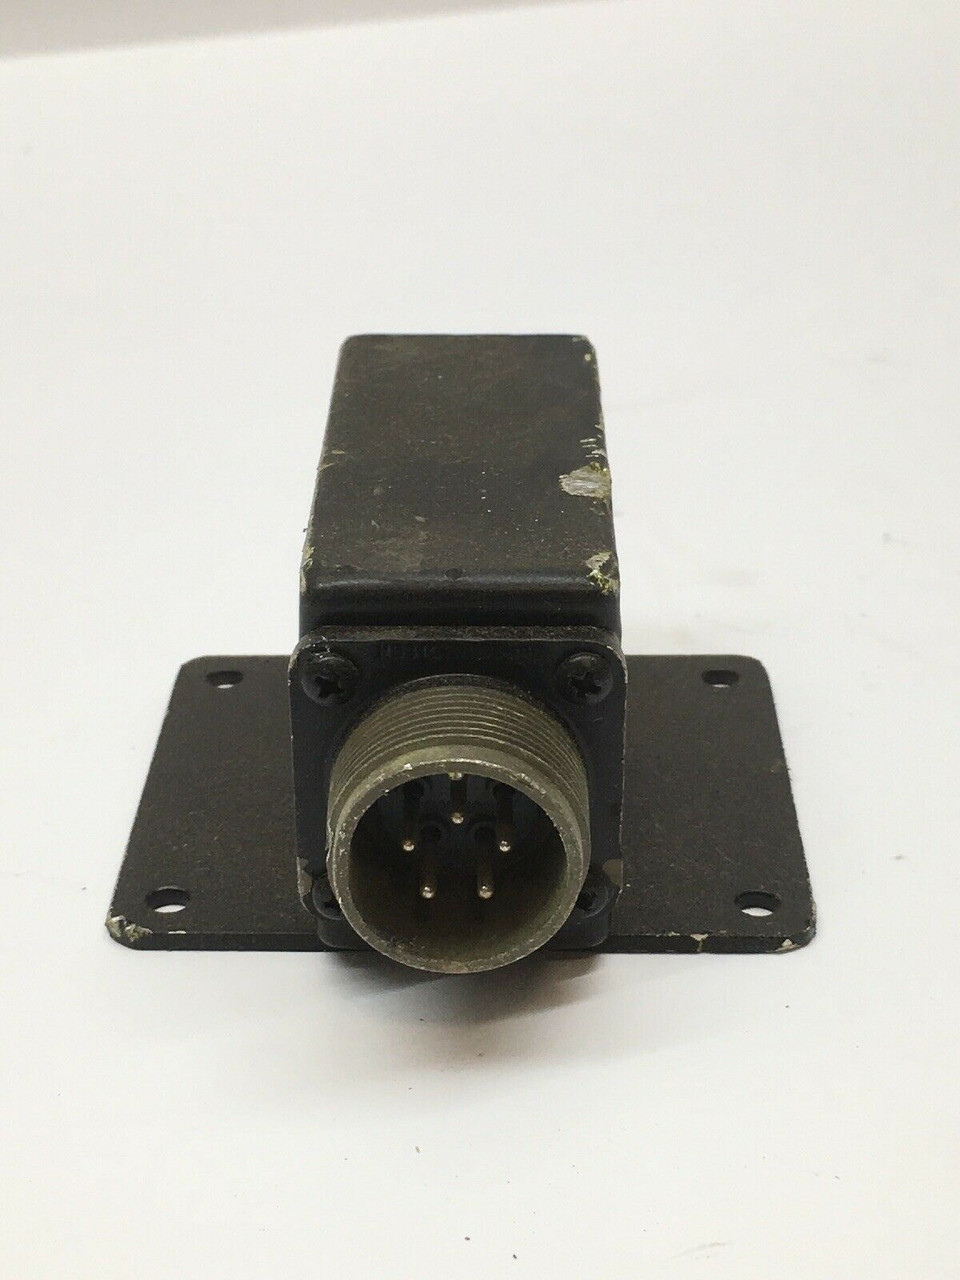 Thermal Flasher 3085-2.4/1-5 Bill McClung +28VDC